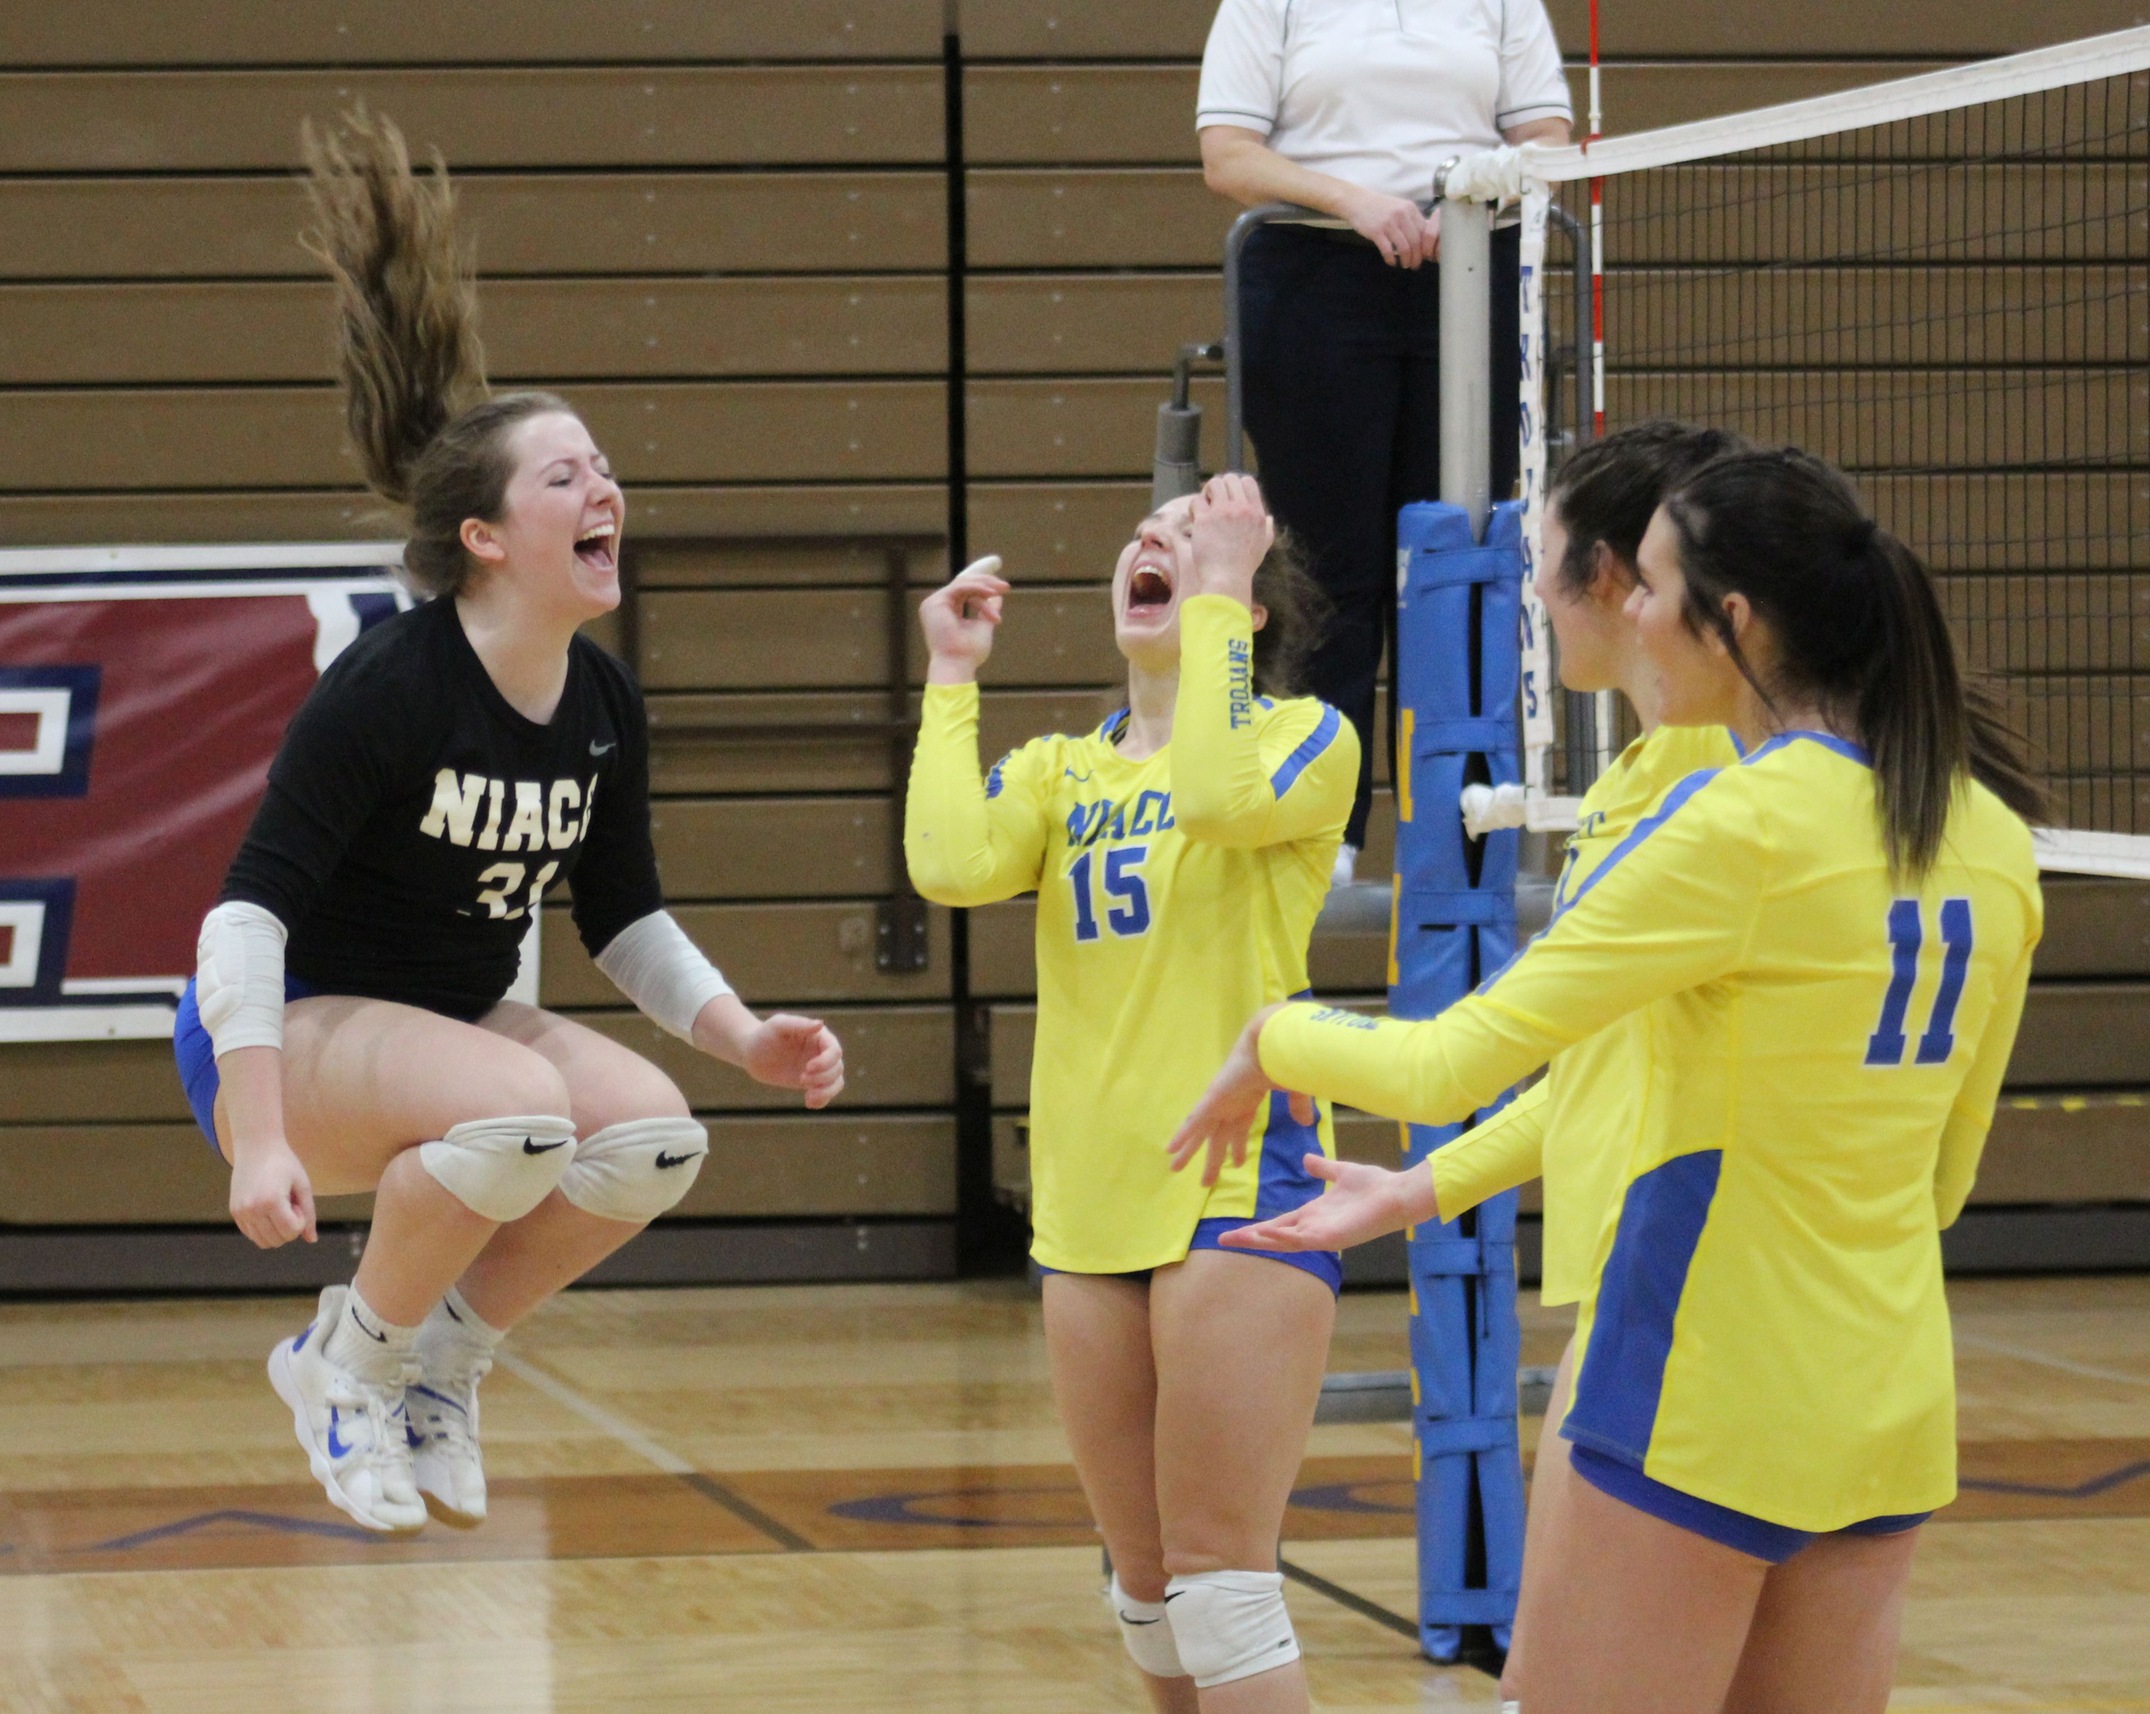 NIACC players celebrate a point in Wednesday's home match against Iowa Lakes.